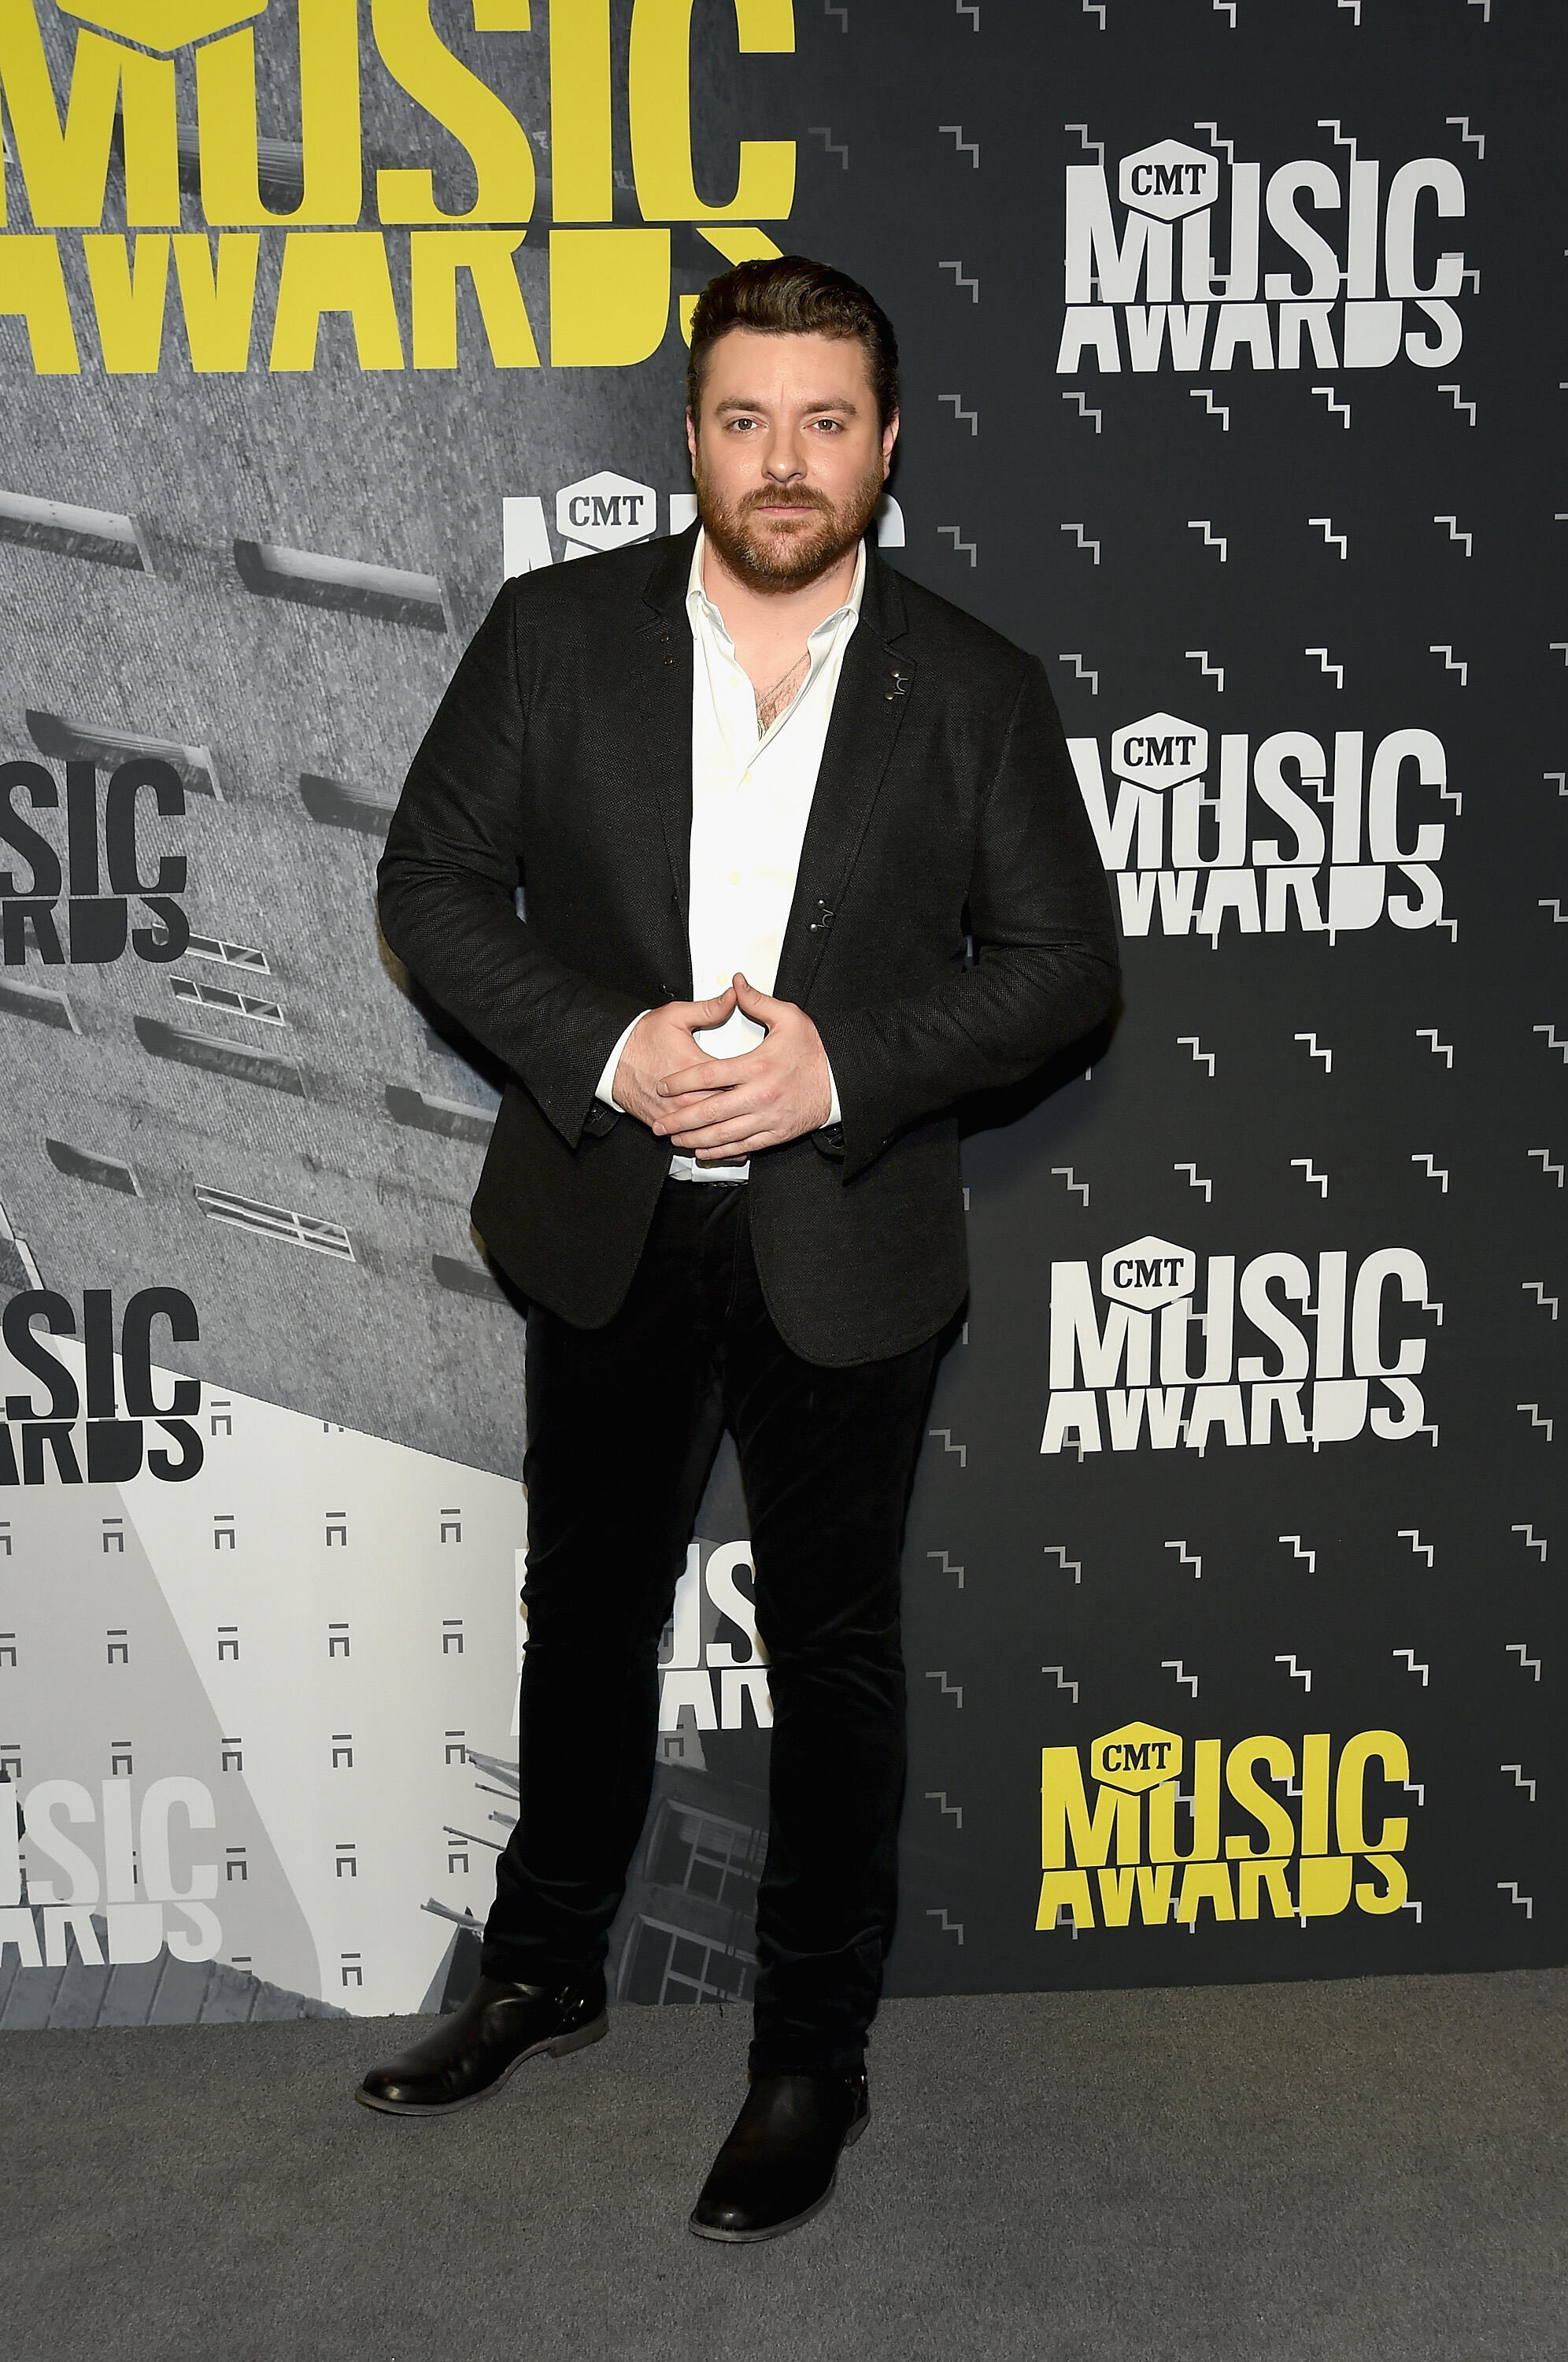 NASHVILLE, TN - JUNE 07:  Musical artist Chris Young  attends the 2017 CMT Music awards at the Music City Center on June 7, 2017 in Nashville, Tennessee.  (Photo by Rick Diamond/Getty Images for CMT)